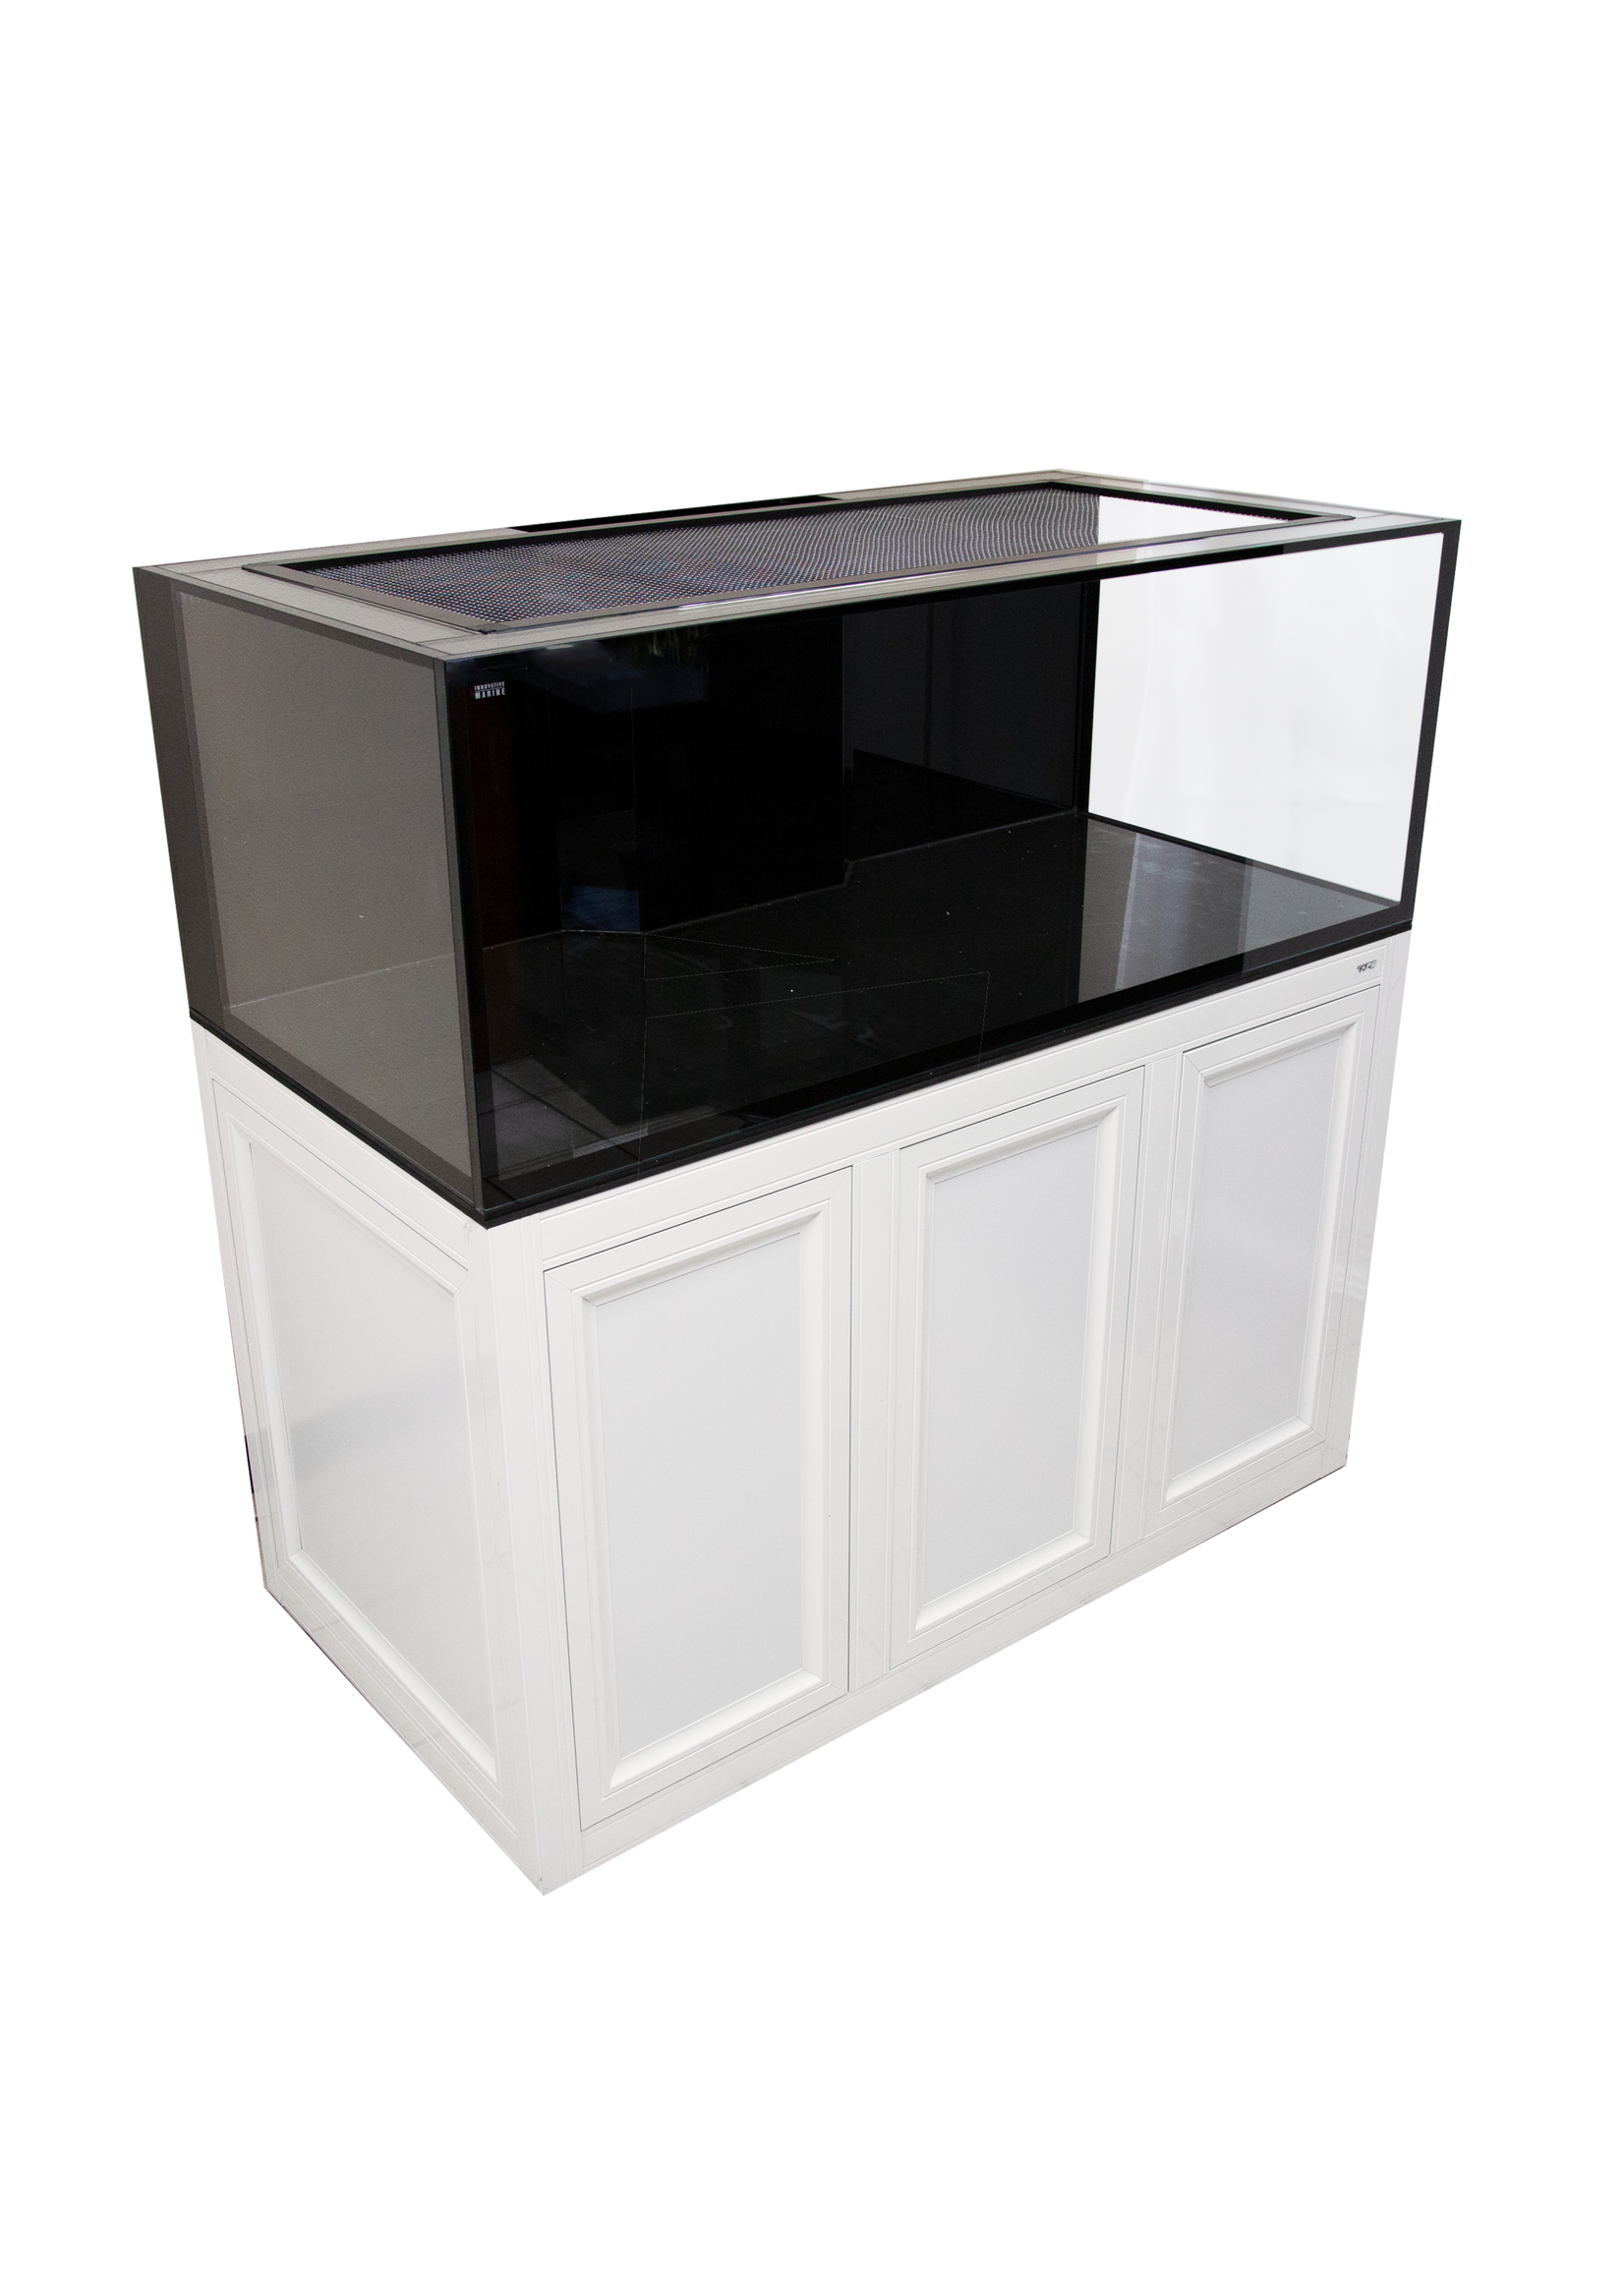 Innovative Marine INT 170 GALLON COMPLETE REEF SYSTEM WHITE (MADE TO ORDER)